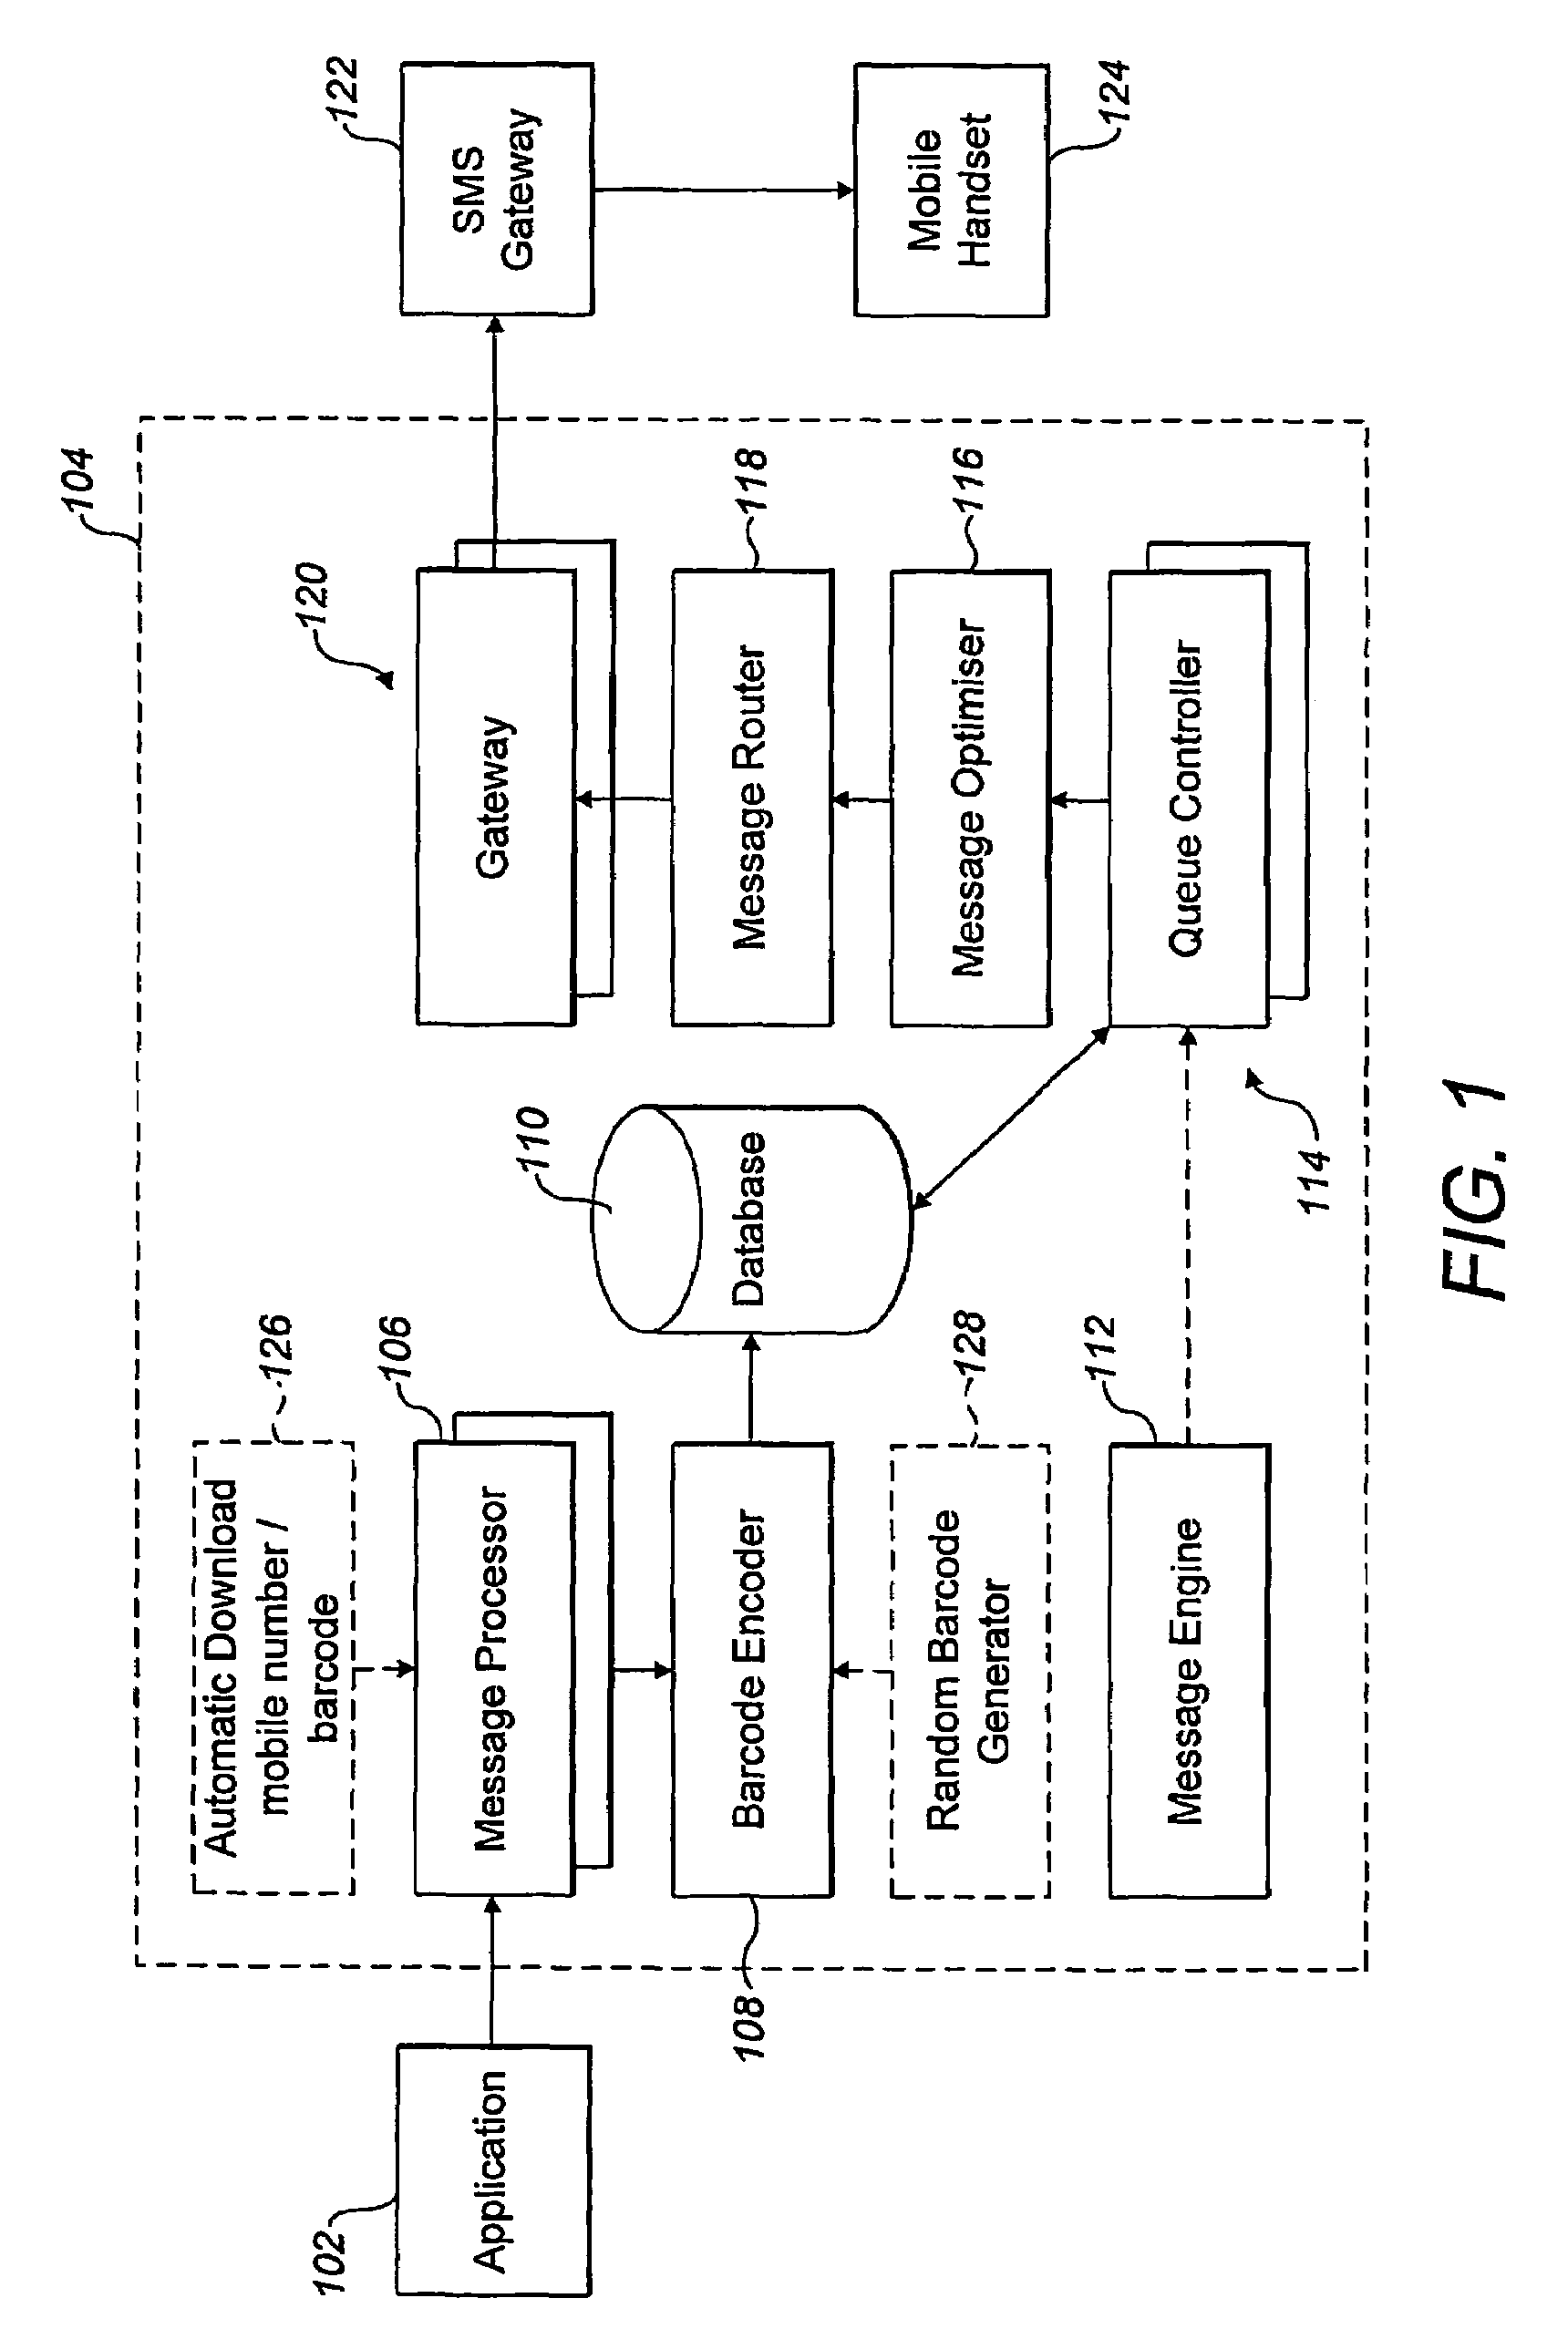 Optimised messages containing barcode information for mobile receiving devices